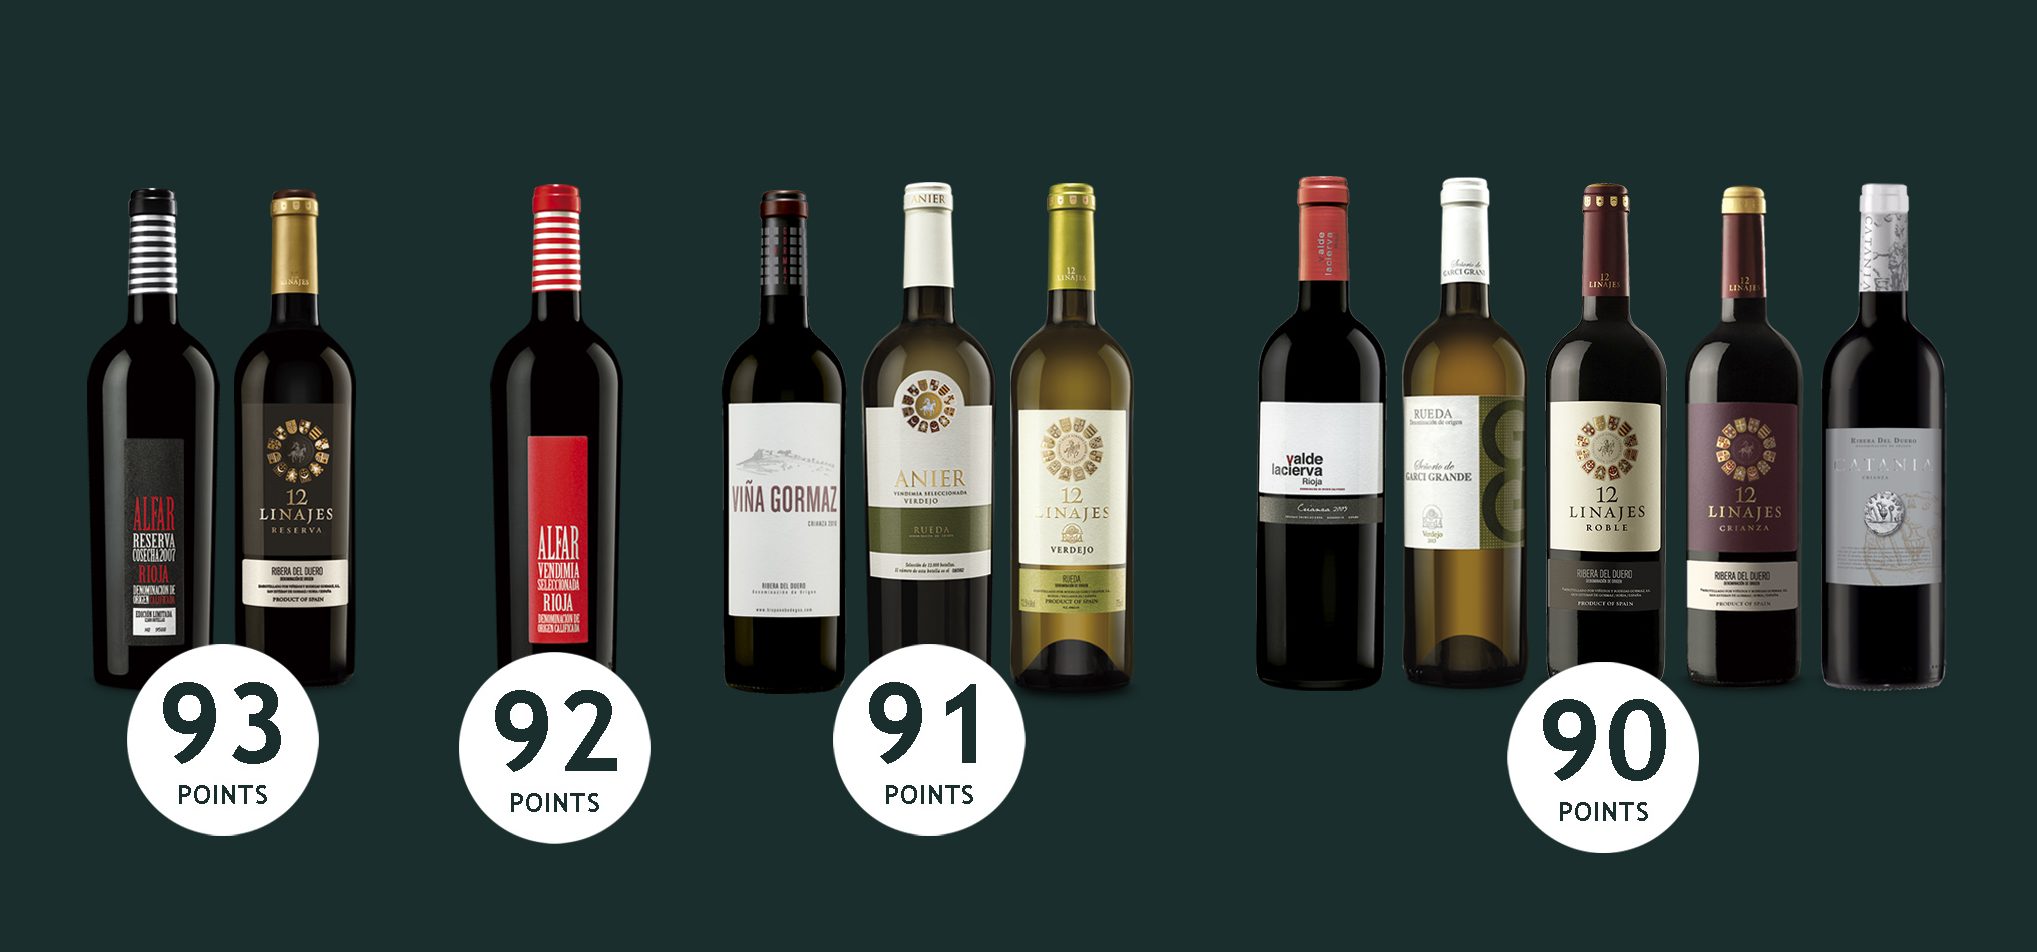 11 wines scored with 90 or more points in Peñin Guide 2017